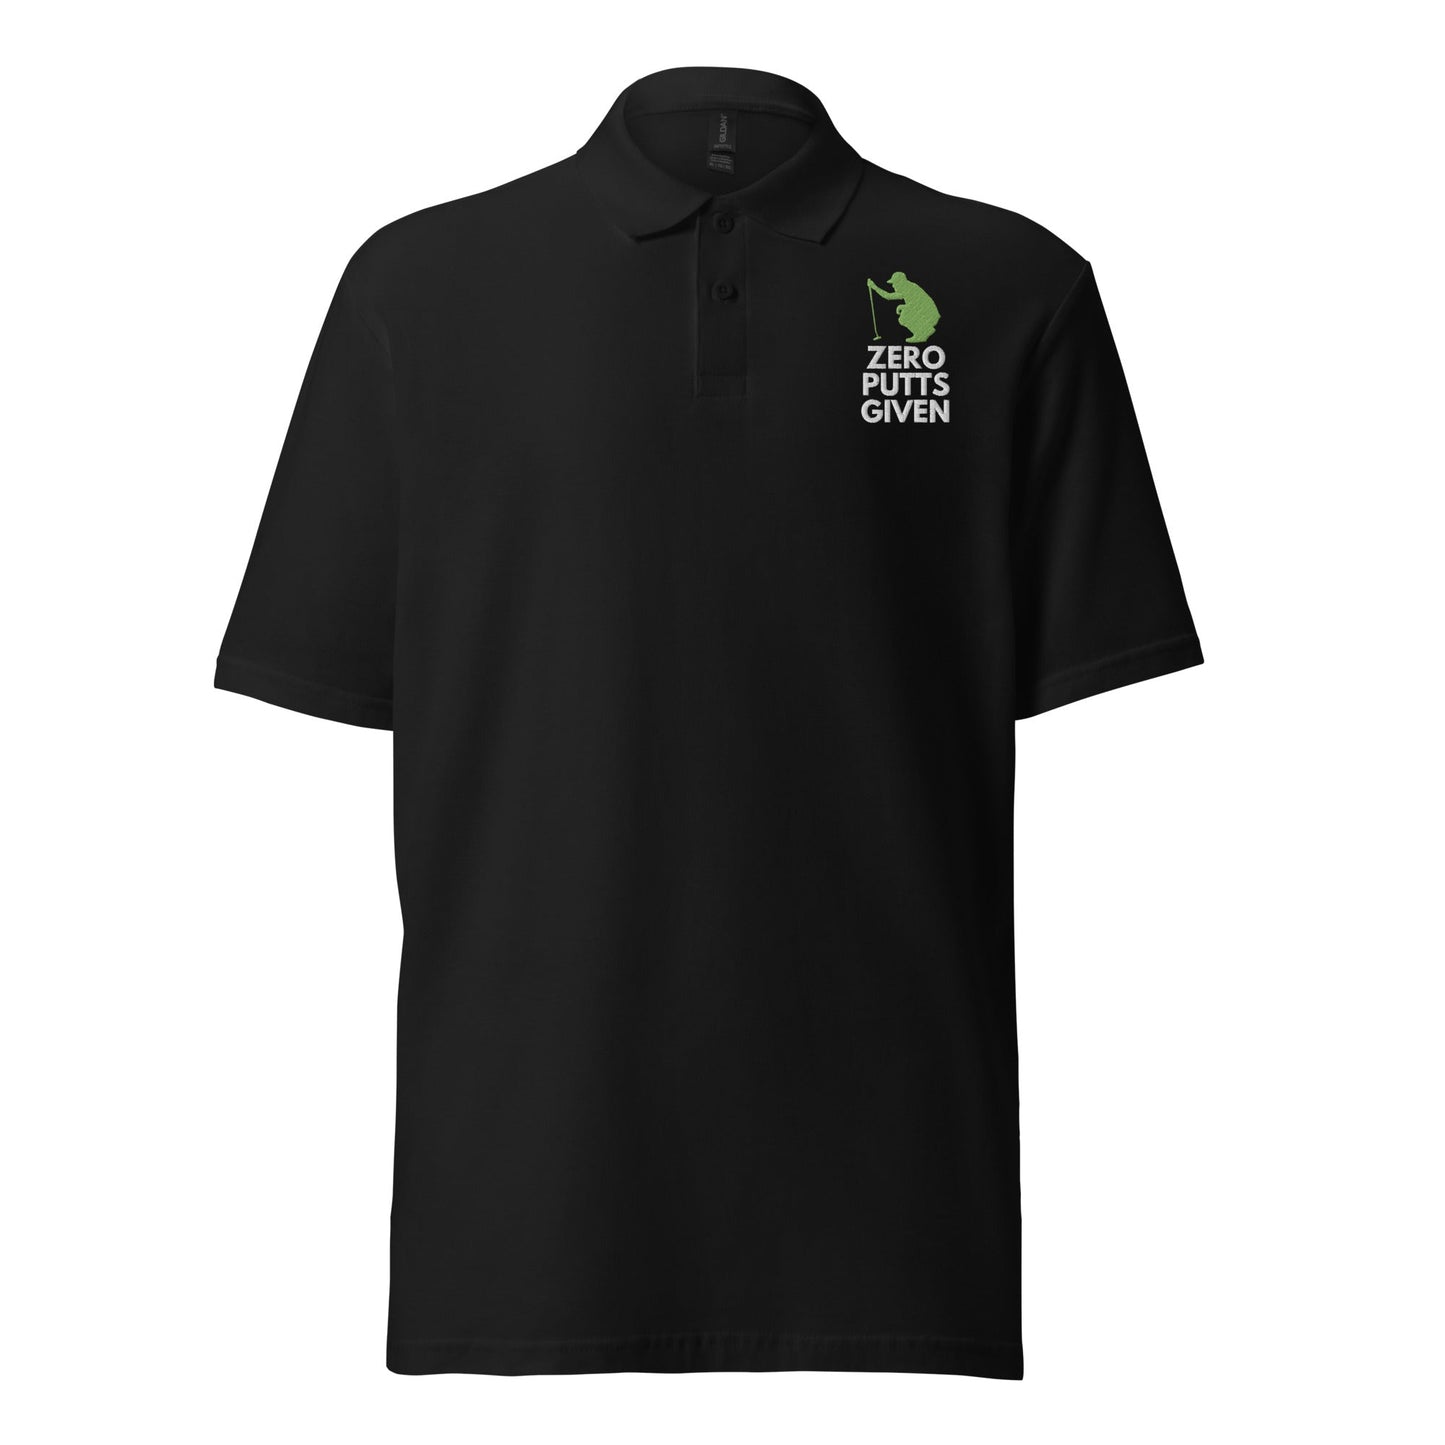 Funny Golfer Gifts  Polo Shirt Black / S Zero Putts Given Unisex pique polo shirt